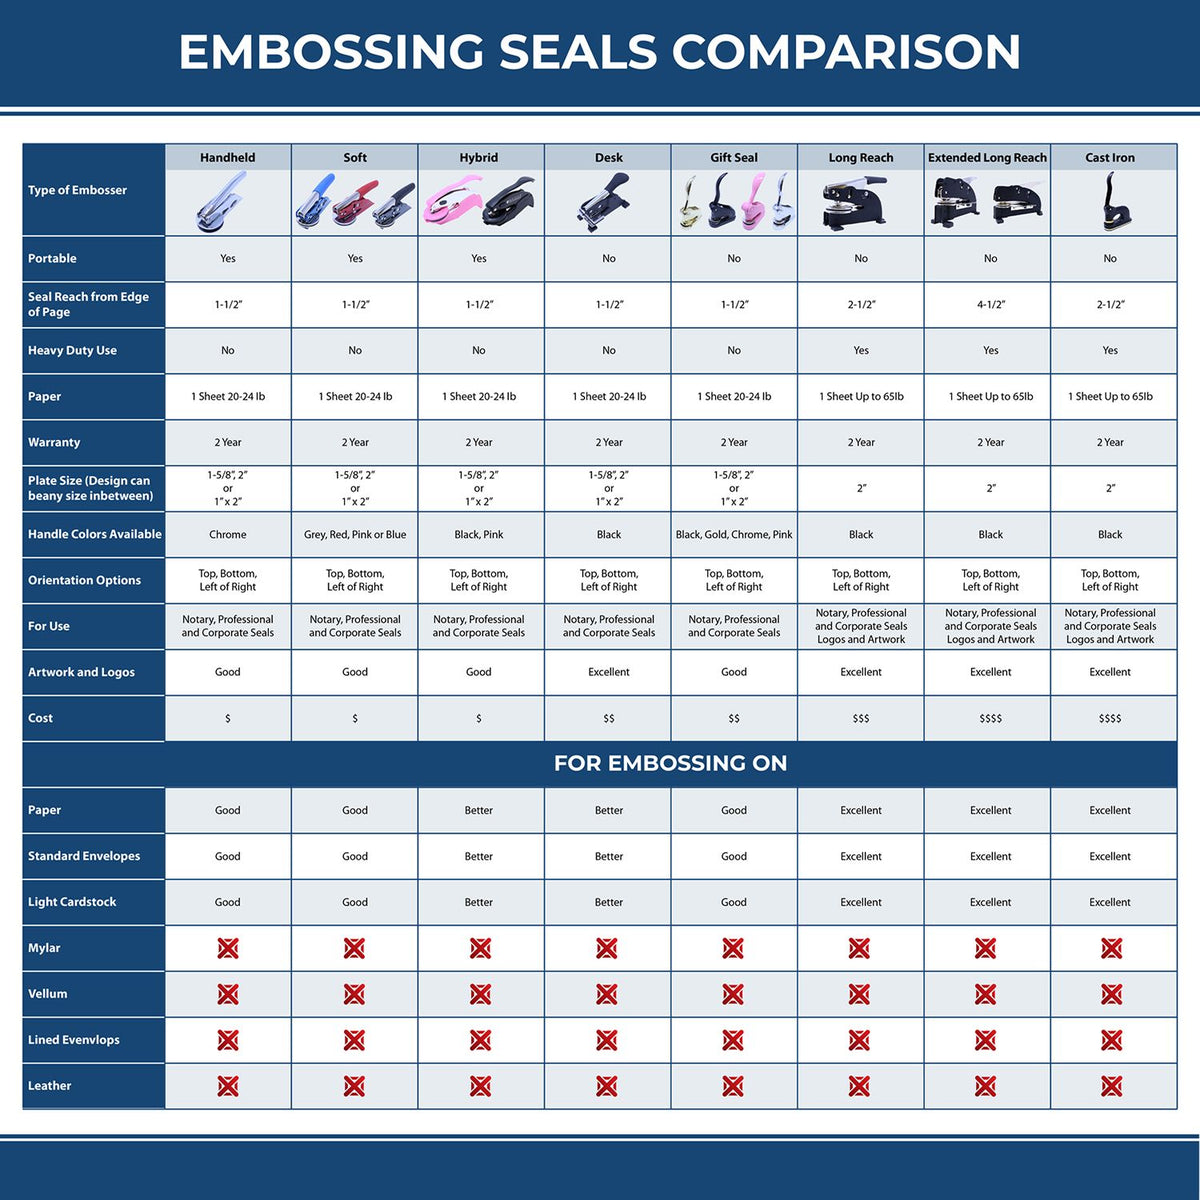 A comparison chart for the different types of mount models available for the Extended Long Reach New Mexico Architect Seal Embosser.